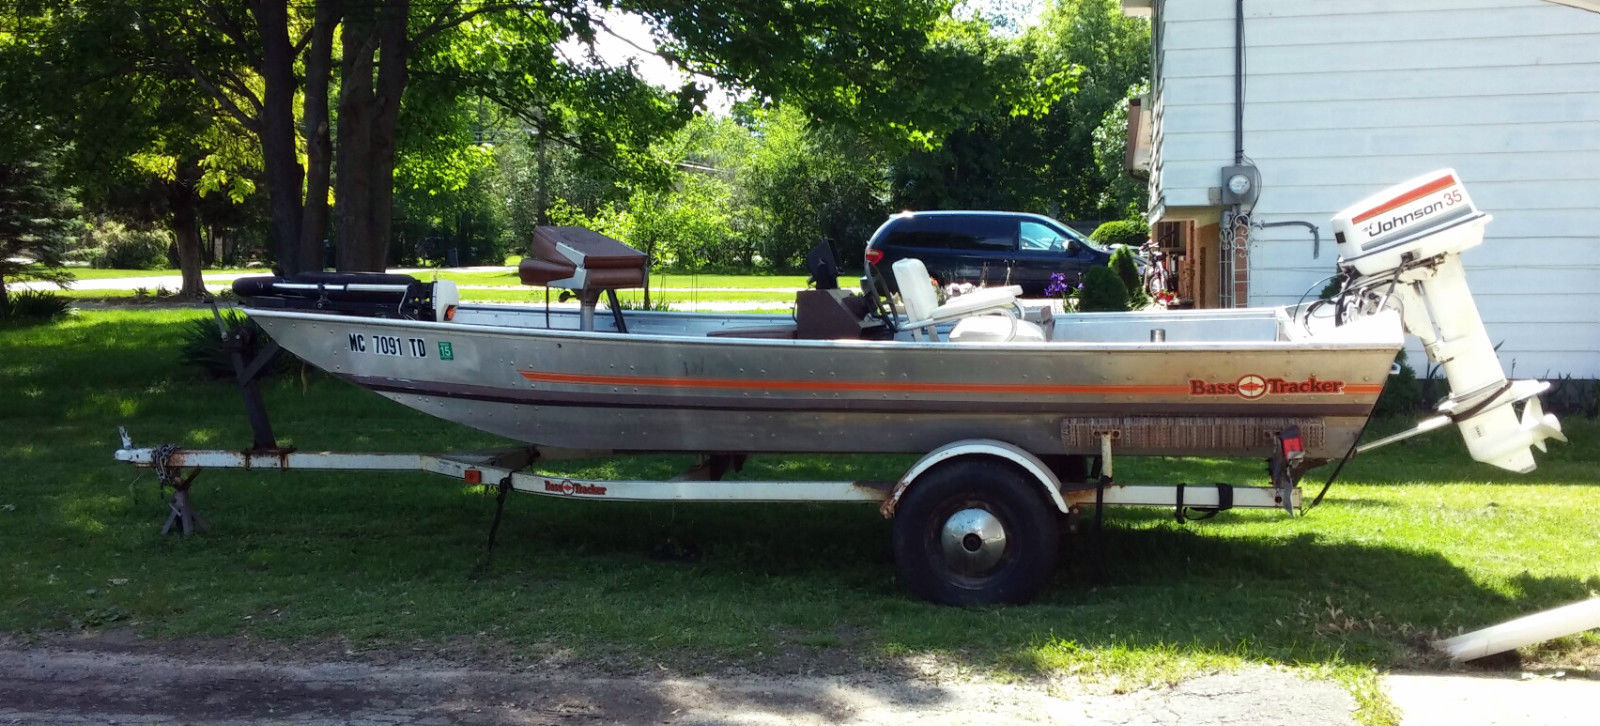 Bass Tracker 1979 for sale for $3,000 - Boats-from-USA.com